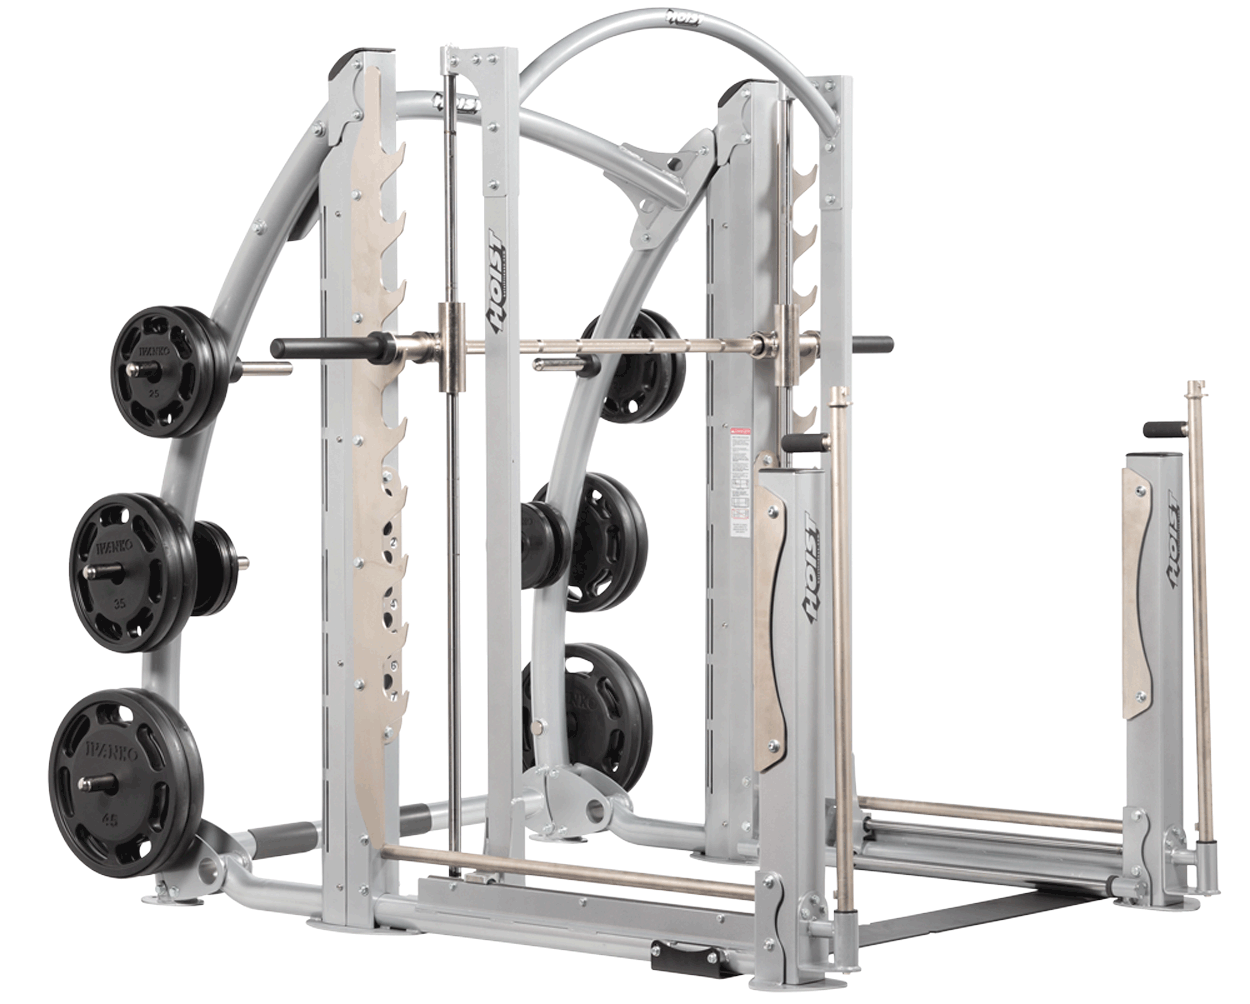 Bimiti 6 Tier Dumbbell Rack Stand Only A-Frame Dumbbell Weight Rack Steel Strength Training Weight Dumbbell Stand for Home Gym Exercise 800 Lbs Weight Capacity 